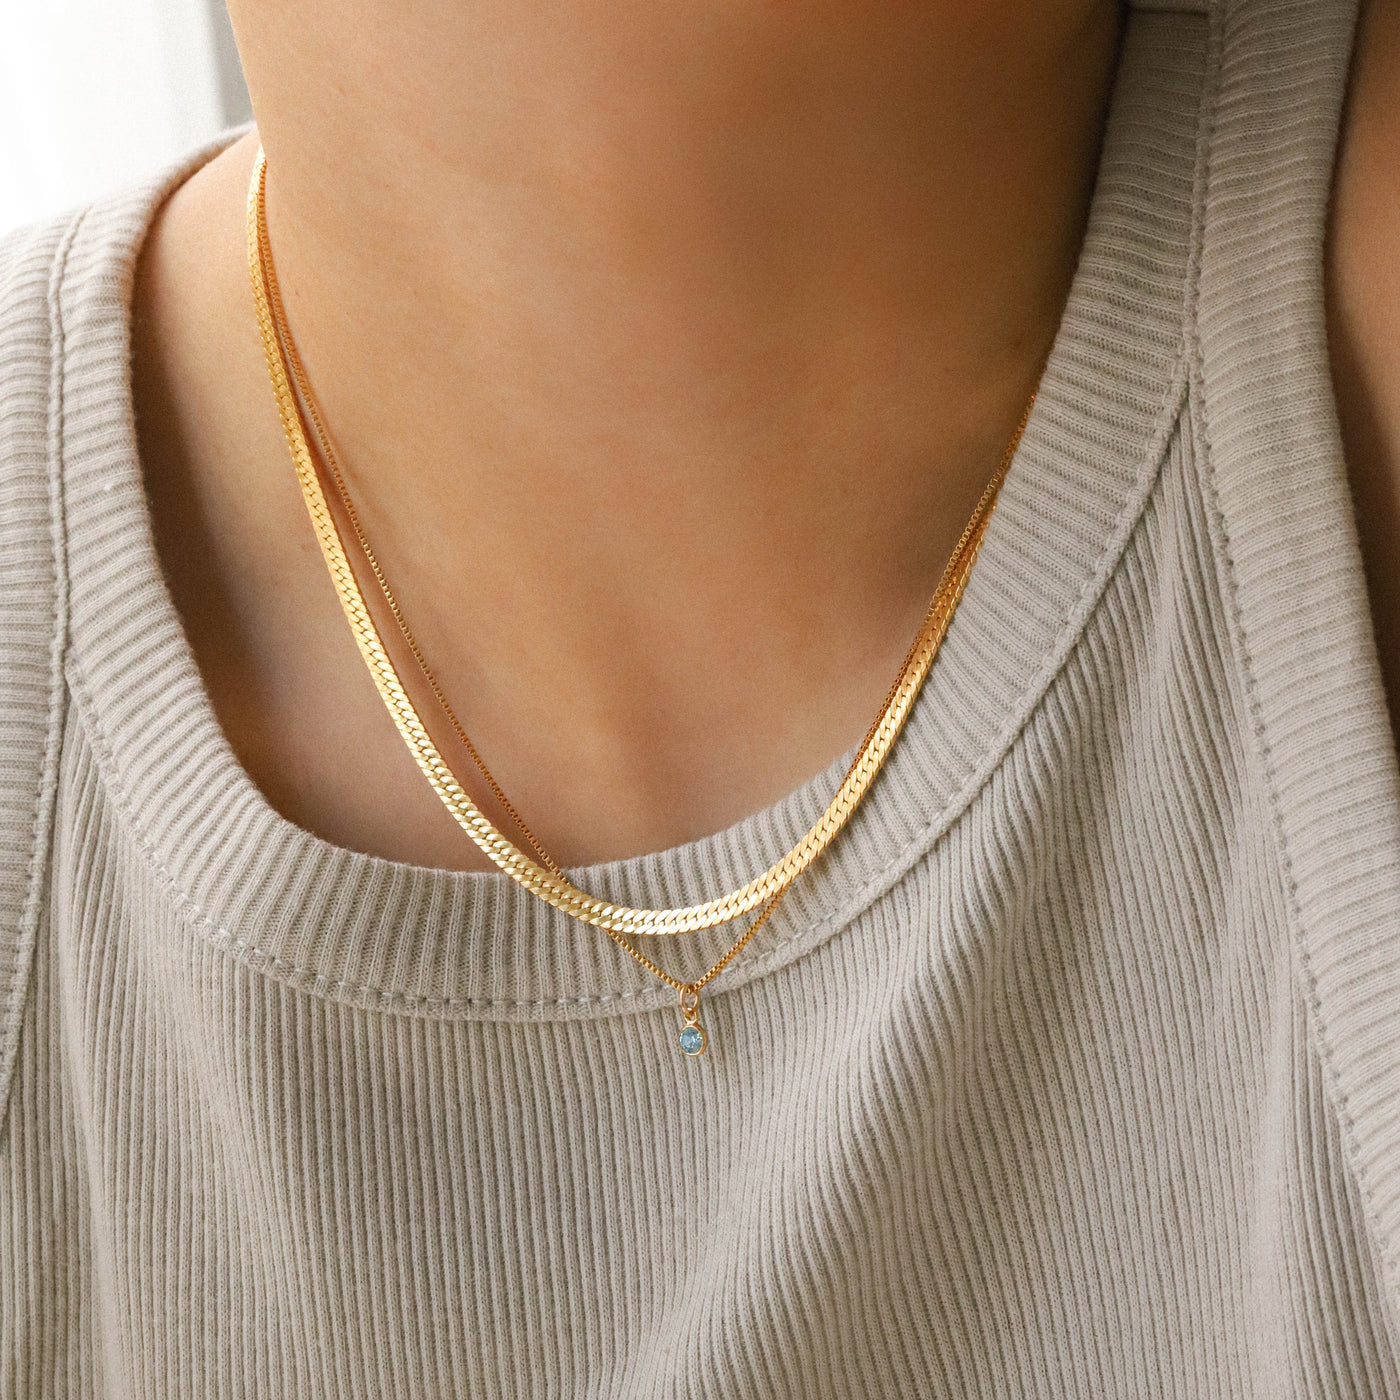 14K gold filled birthstone necklace and herringbone necklace